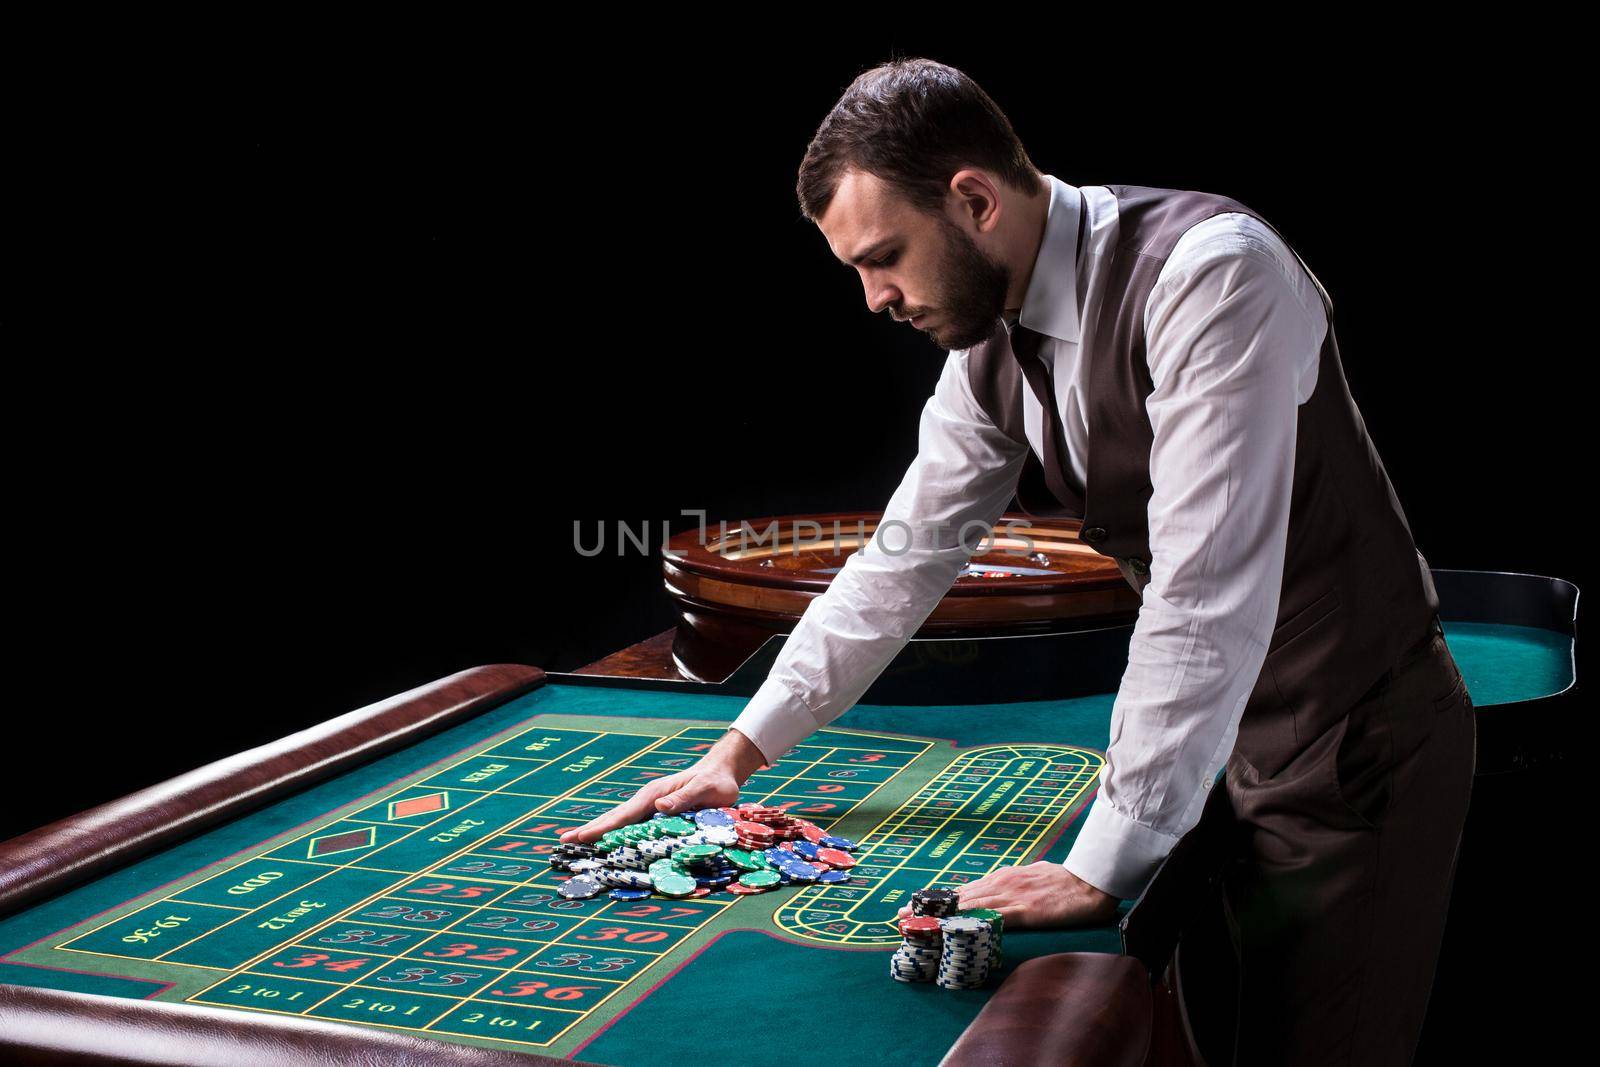 Croupier behind gambling table in a casino on a black background. Gambling. Casino. Roulette. Poker